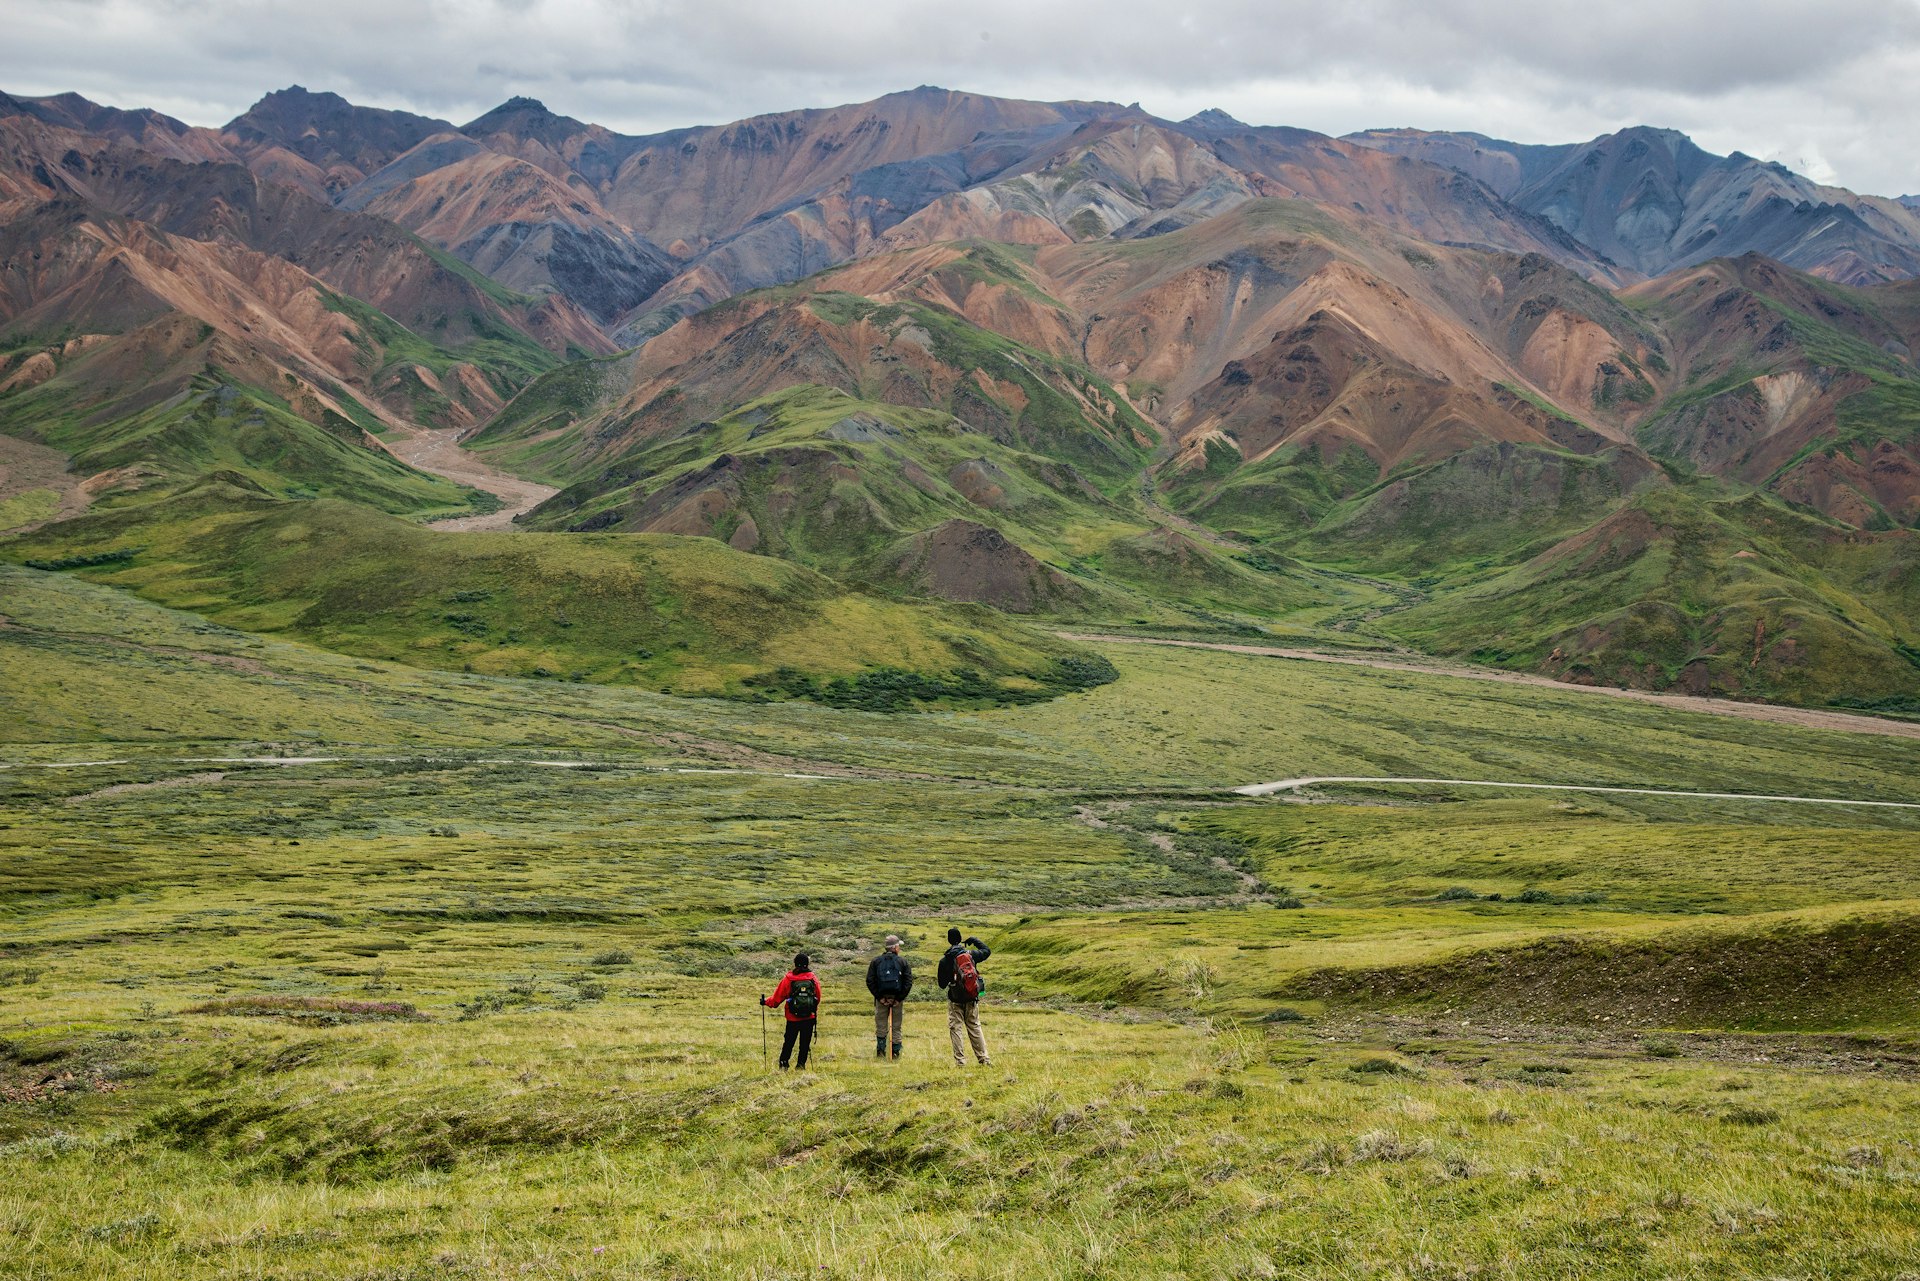 Hikers in a treeless landscape, with mountains in the background